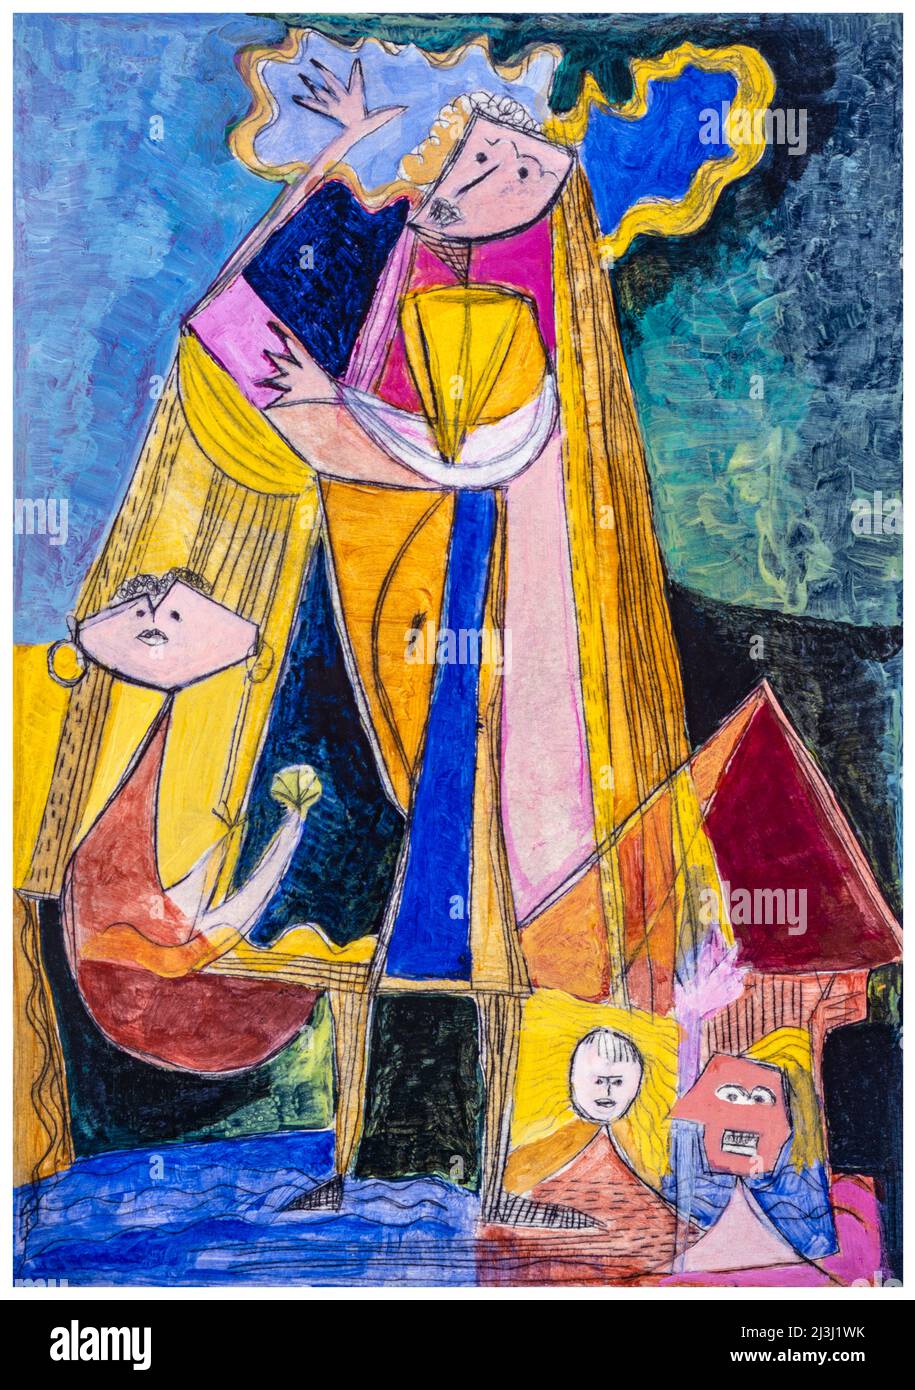 https://c8.alamy.com/comp/2J3J1WK/painting-by-pia-bhler-etching-acrylic-jesus-is-the-way-to-salvation-says-the-bible-therapies-feelings-and-the-culture-of-self-help-is-the-salvation-of-the-modern-soul-but-this-does-not-make-life-easier-on-the-contrary-it-makes-it-more-complicated-says-the-book-by-eva-illouz-2J3J1WK.jpg